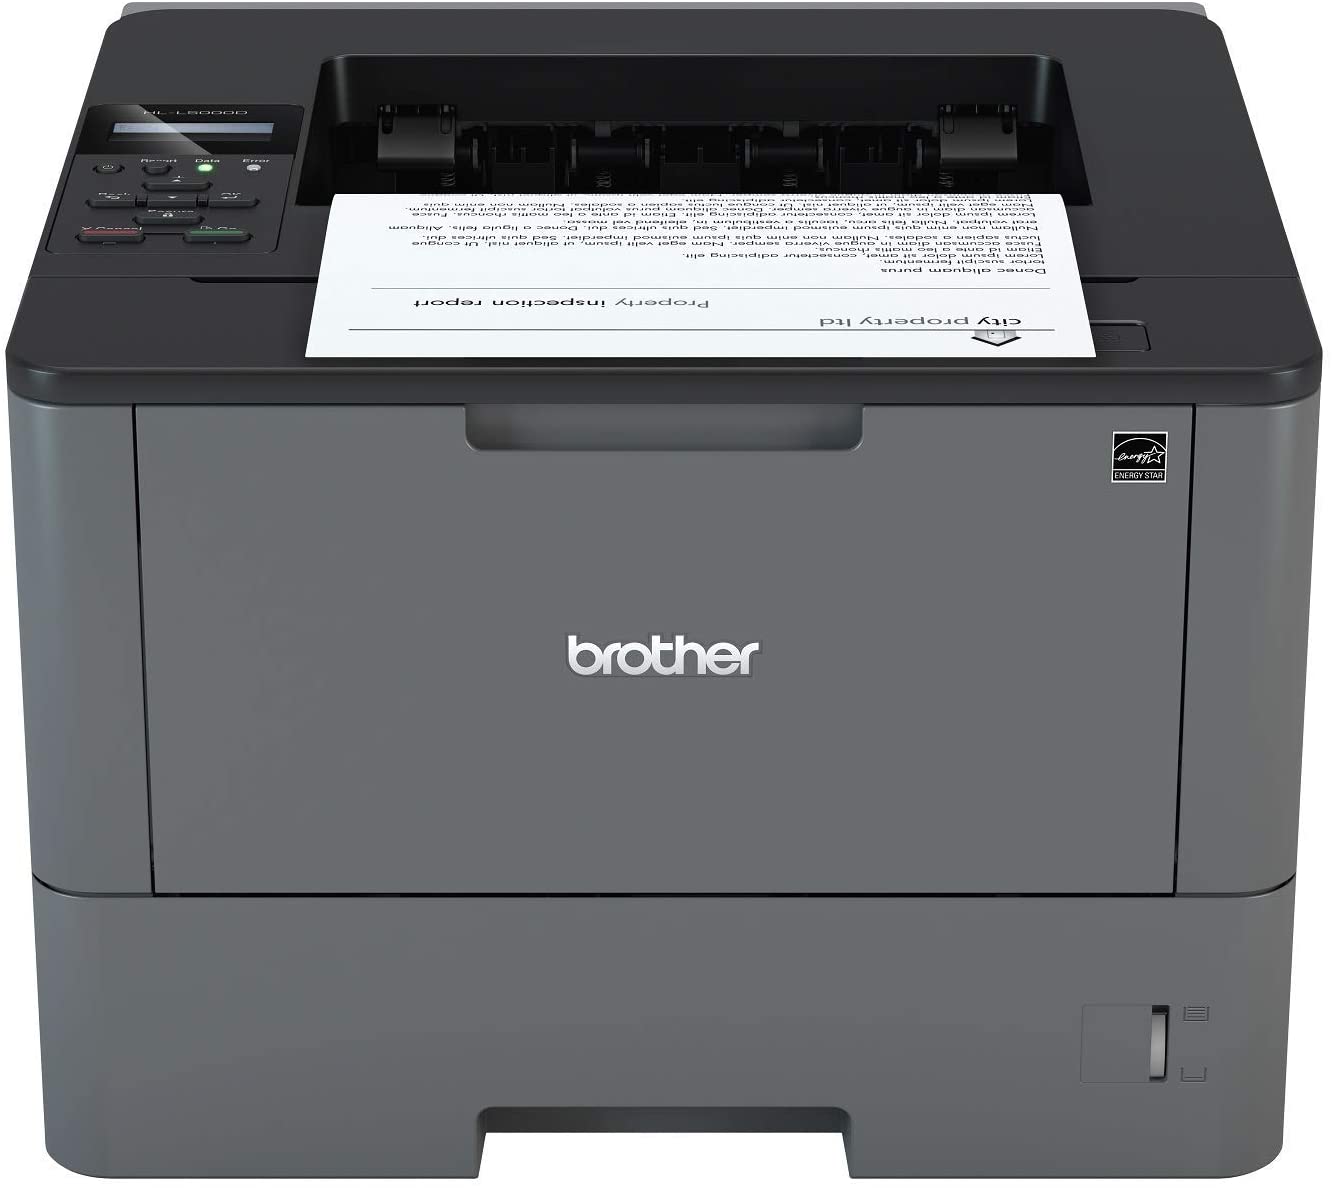 brother mfc 8460n driver for mac